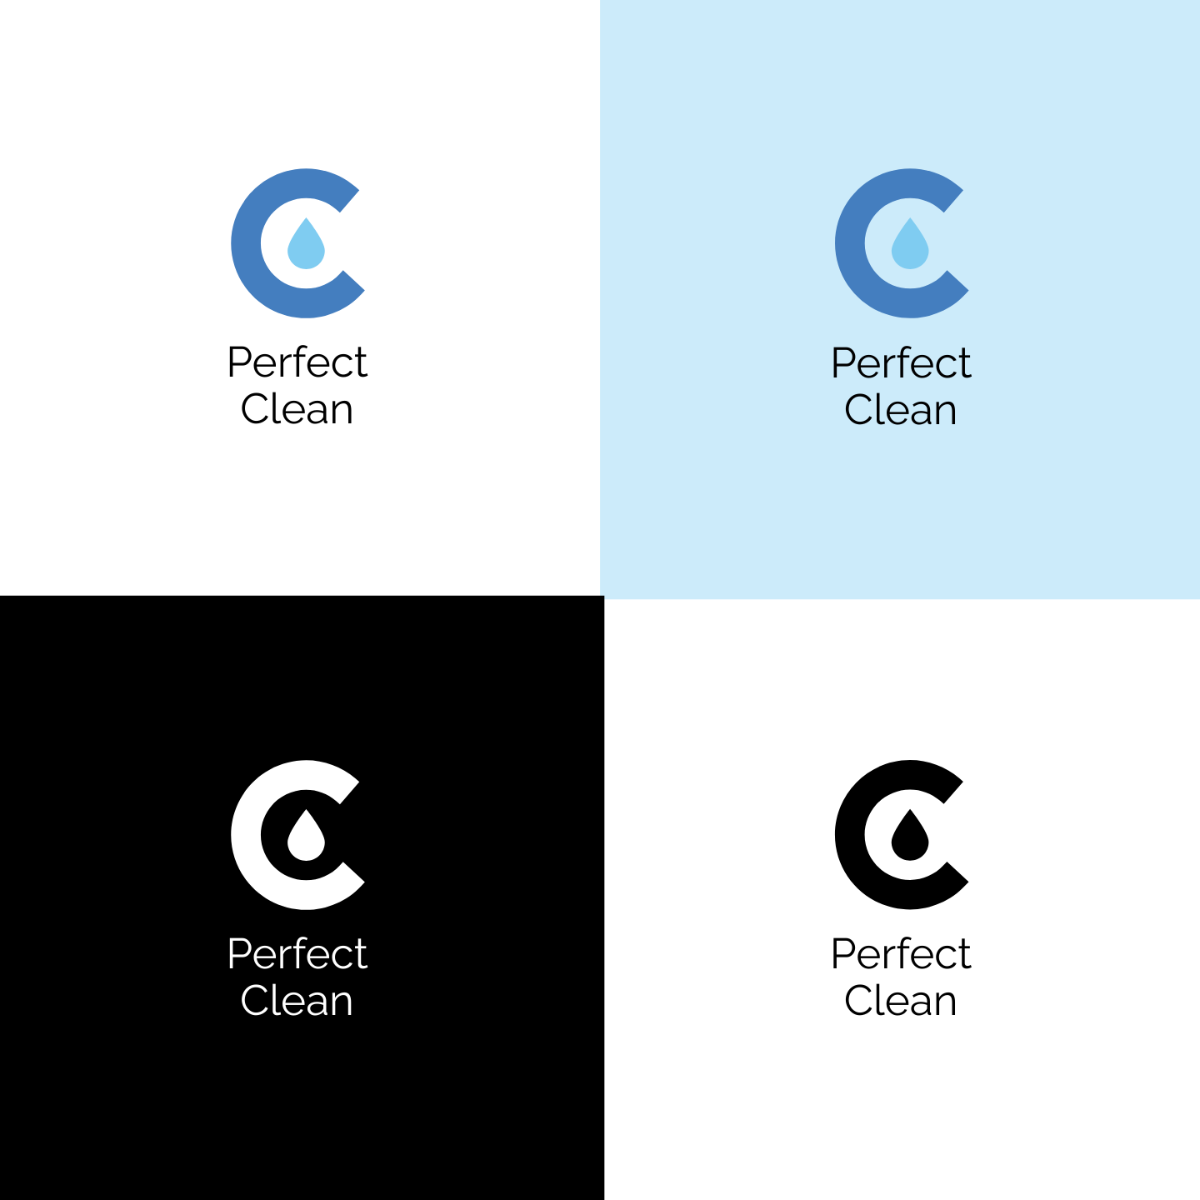 Cleaning Services Logo Template